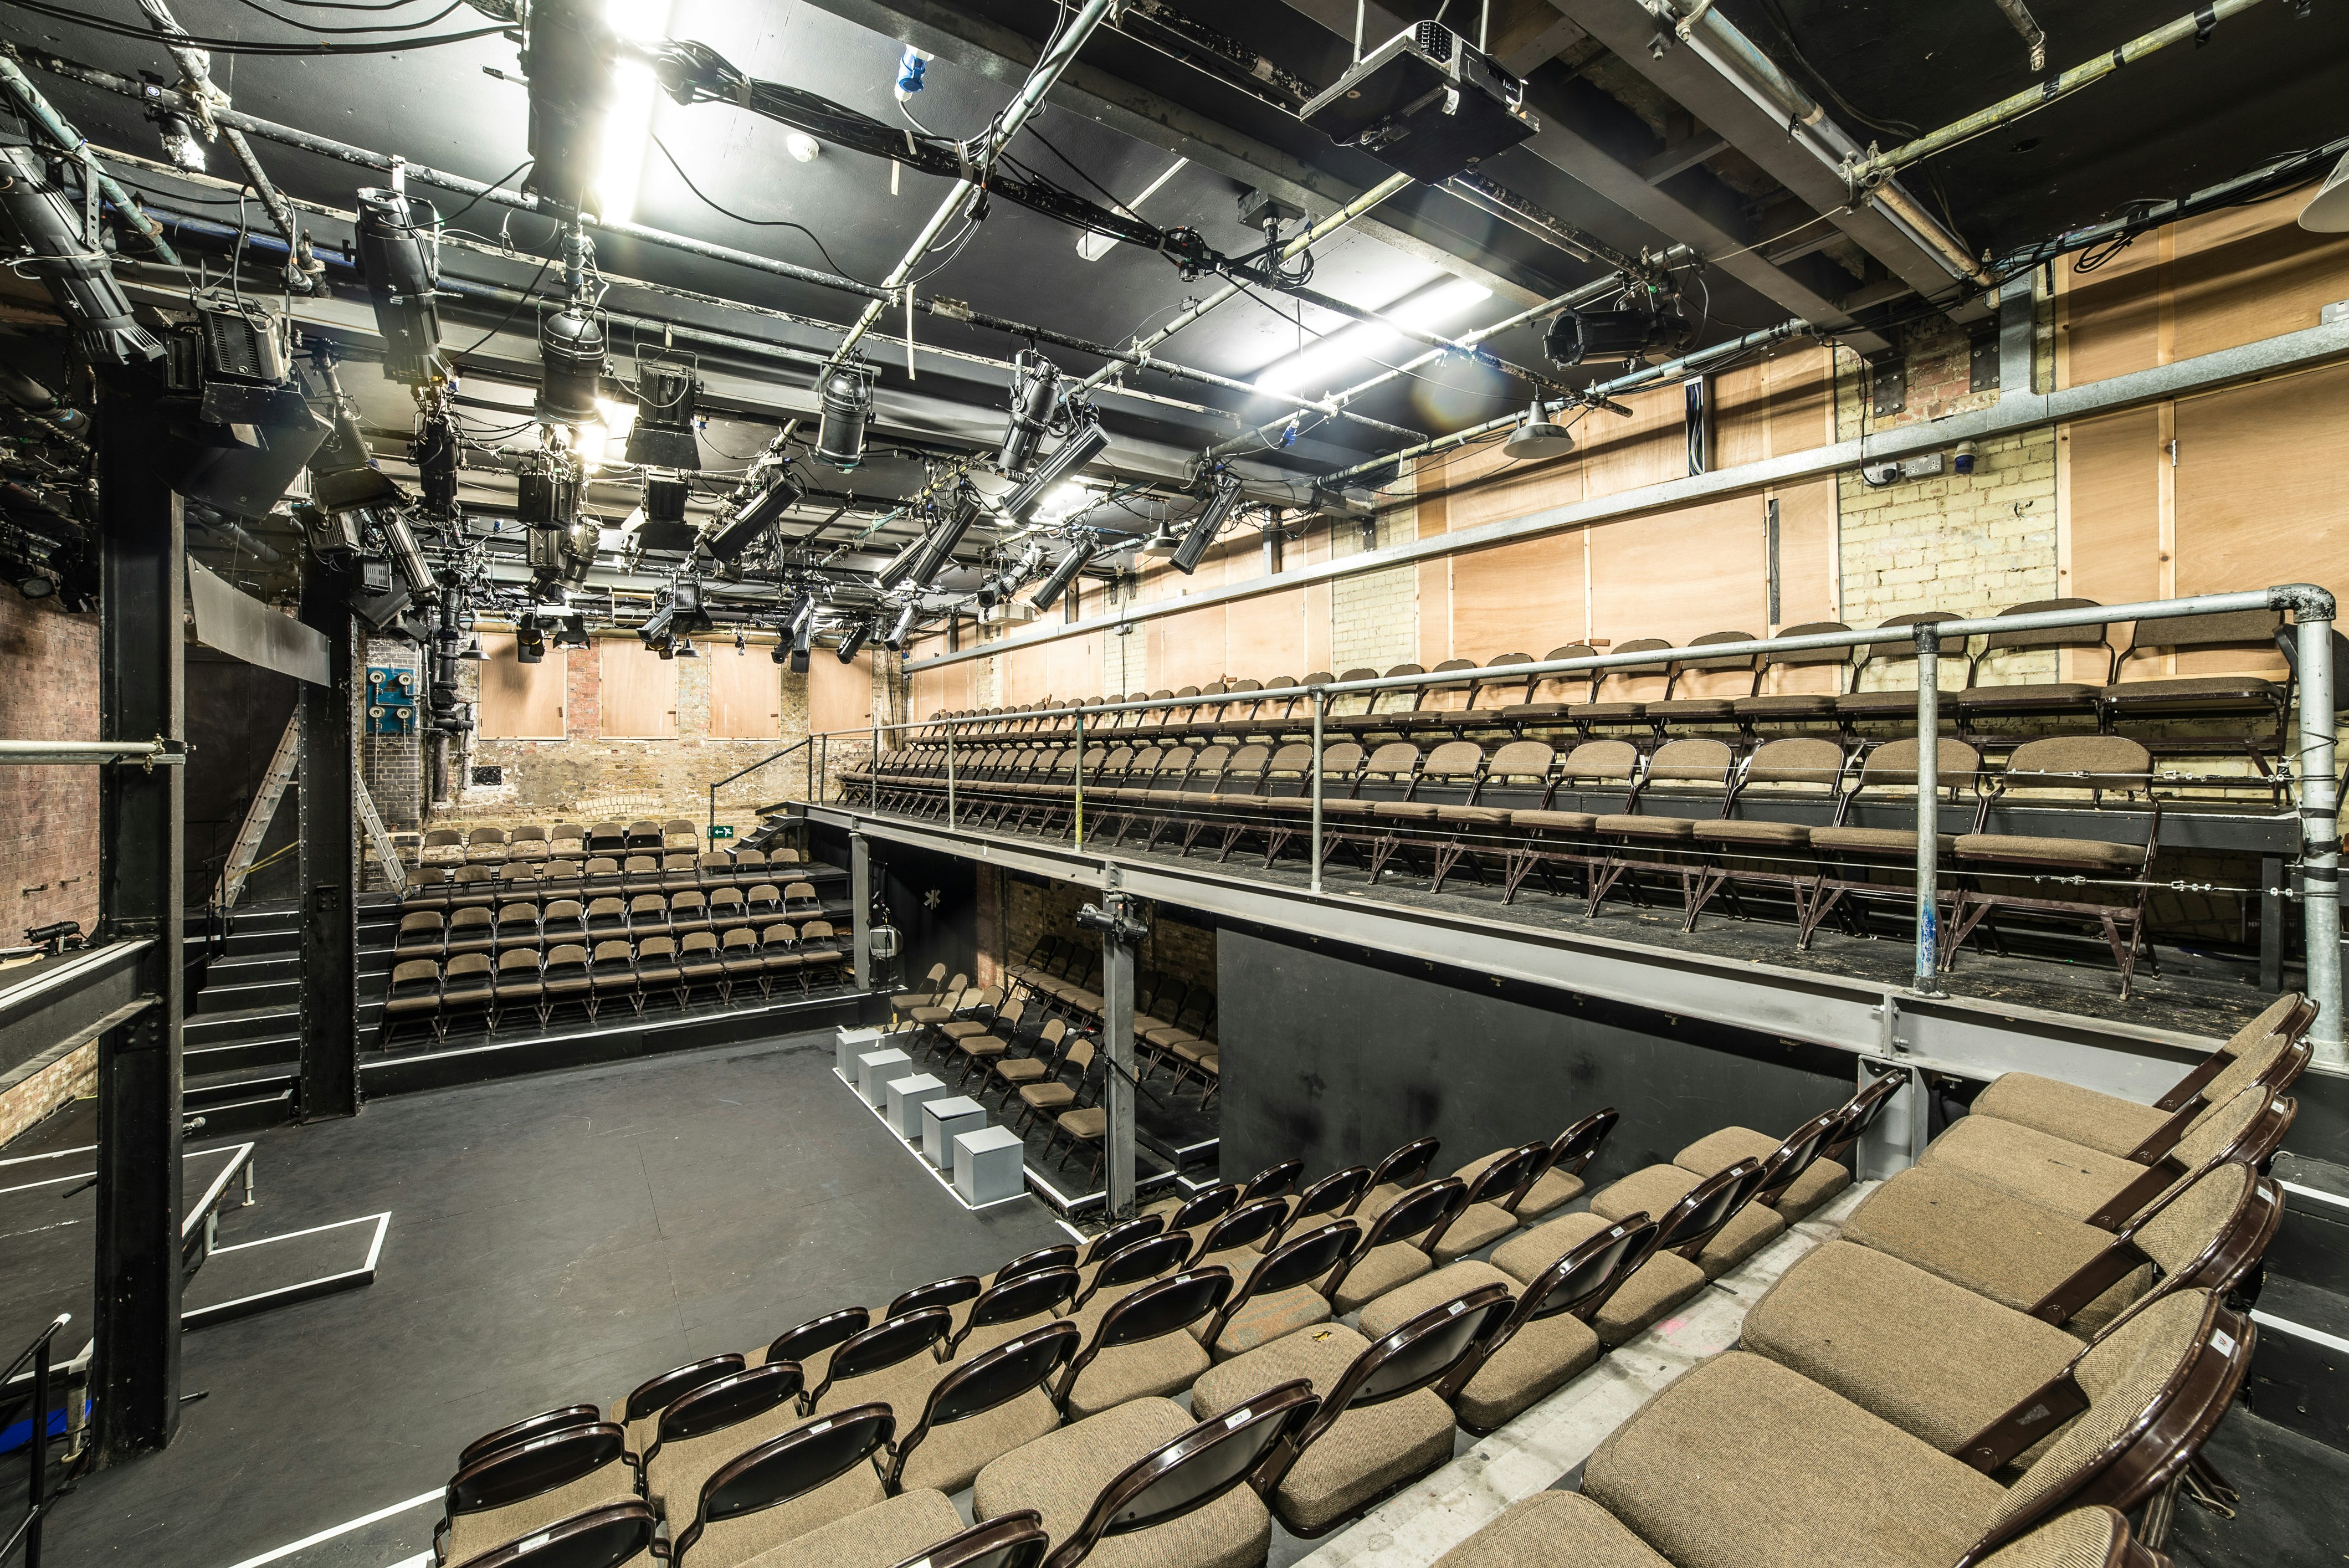 Away Day Venues in West London - Arcola Theatre & Bar